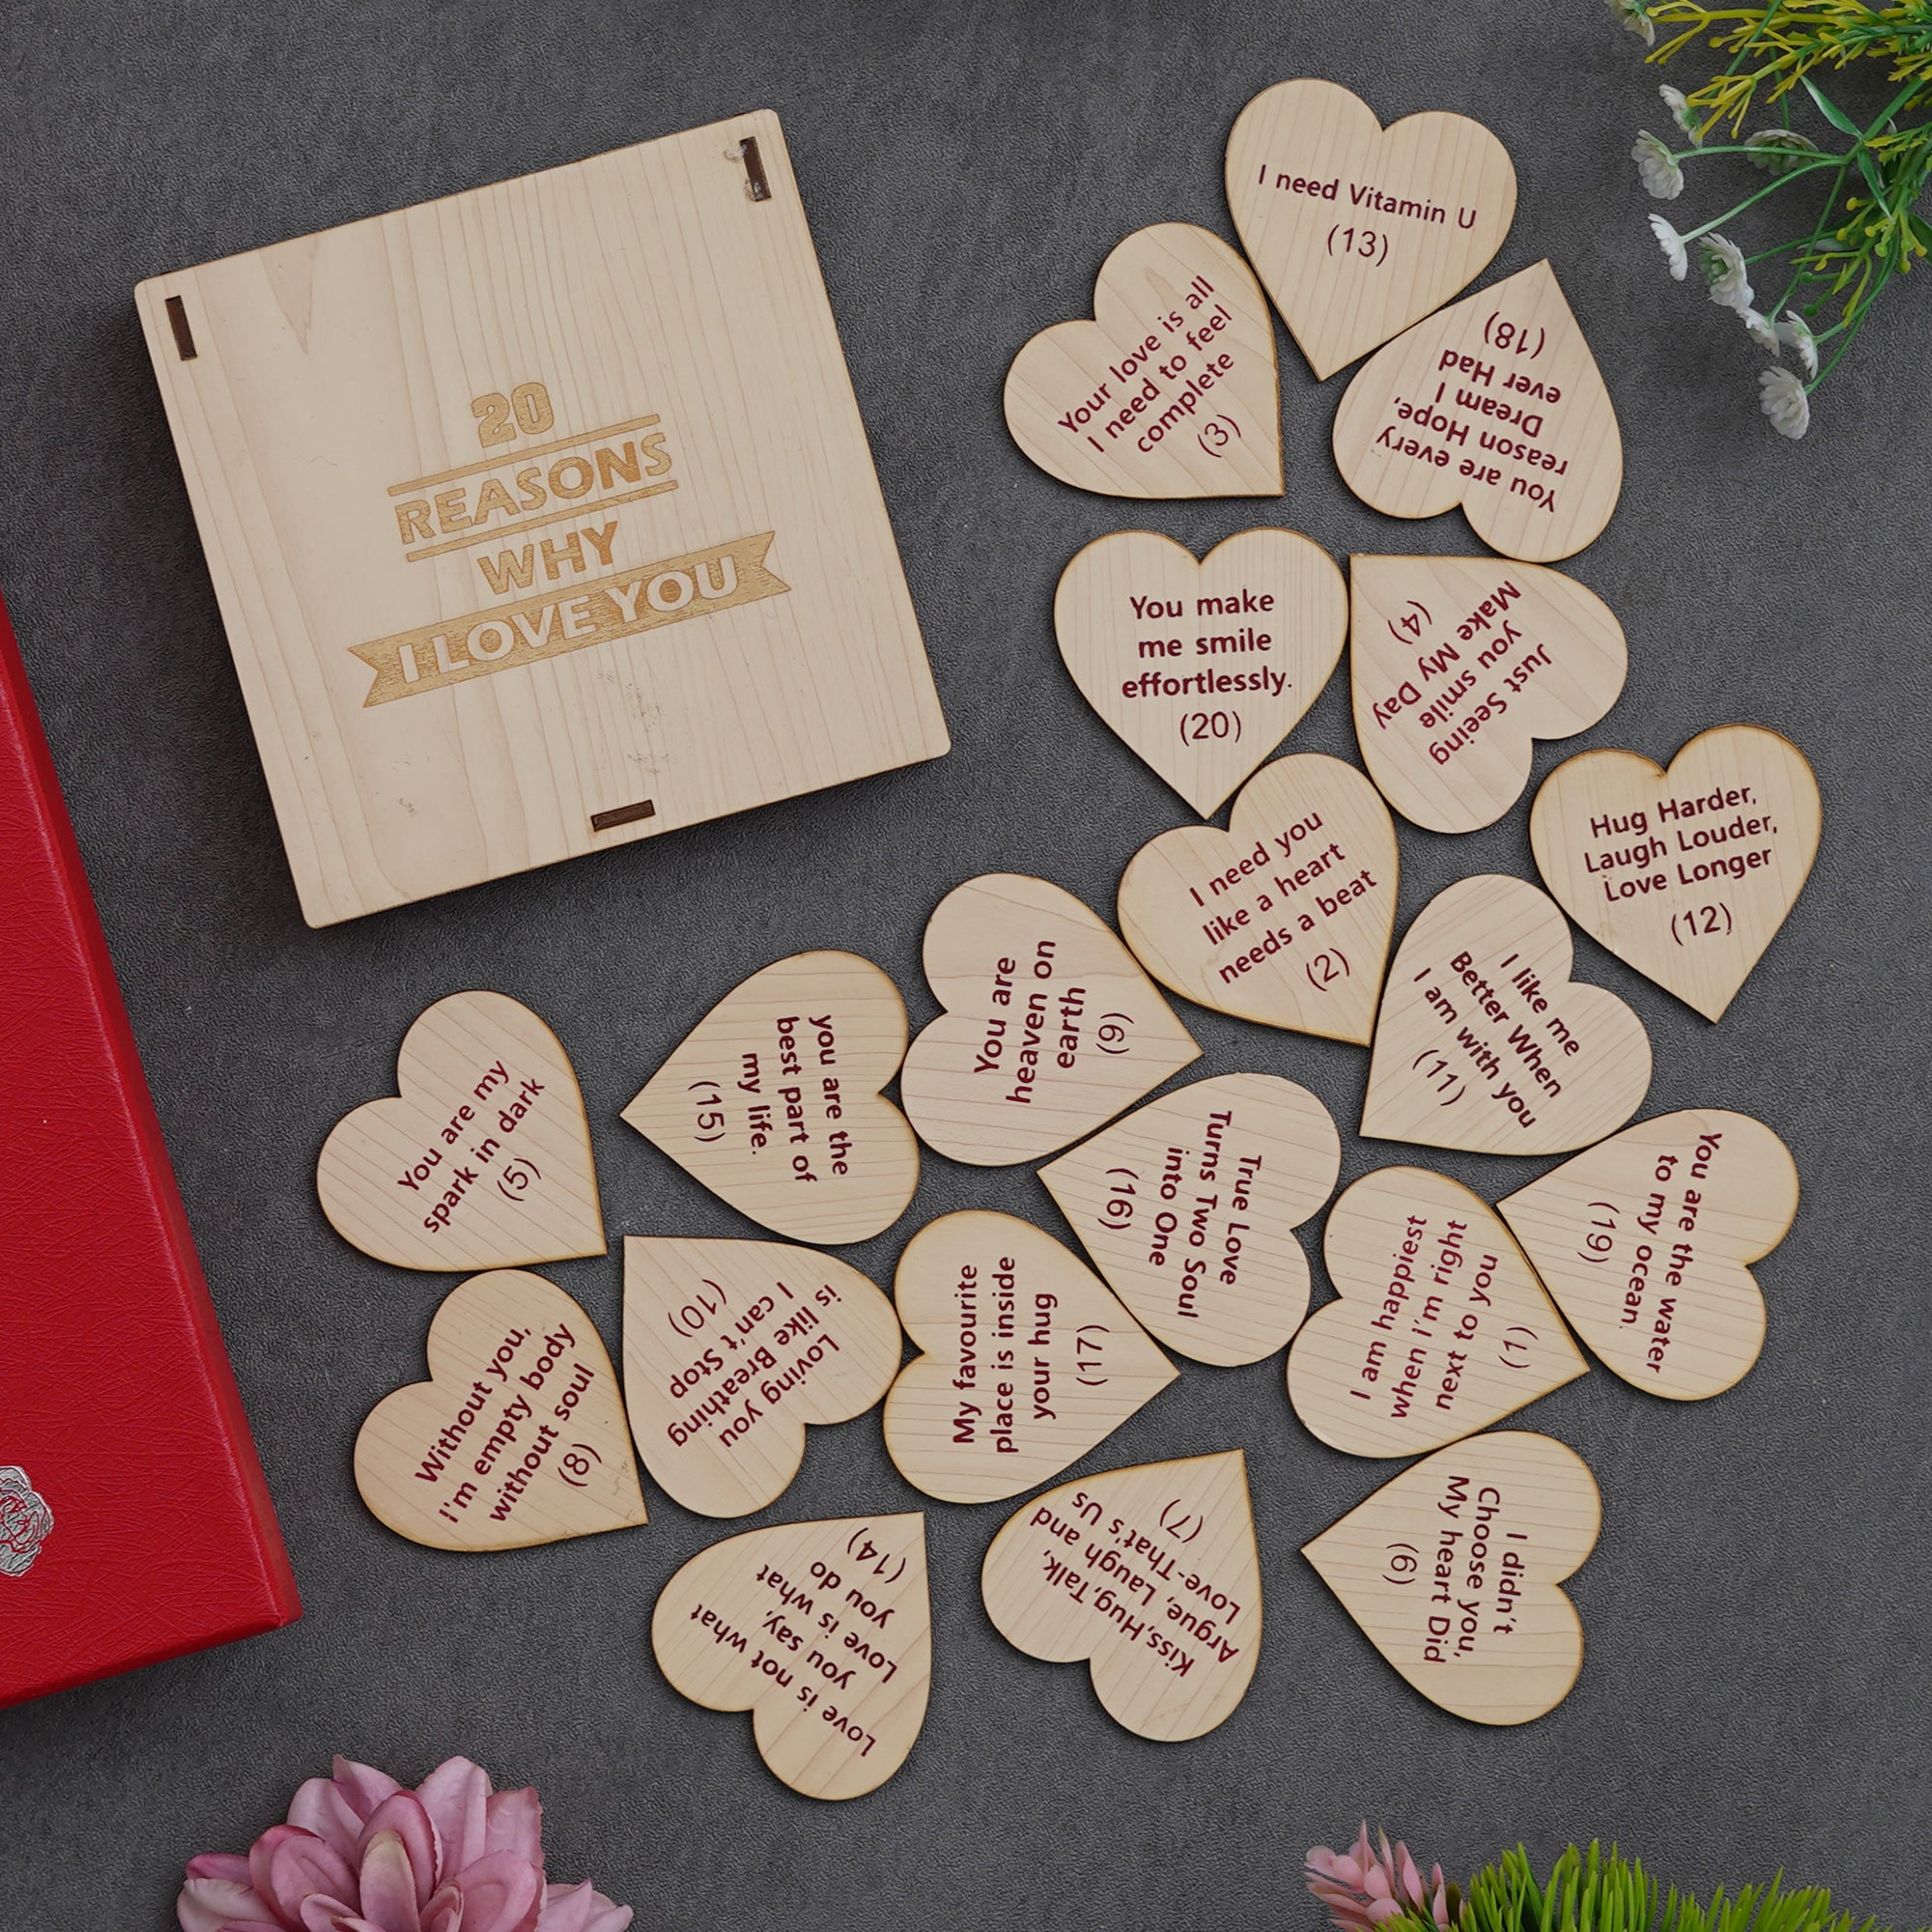 Valentine Combo of Card, Heart Shaped Gift Box Set with White Teddy and Red Roses, "20 Reasons Why I Love You" Printed on Little Hearts Wooden Gift Set 5